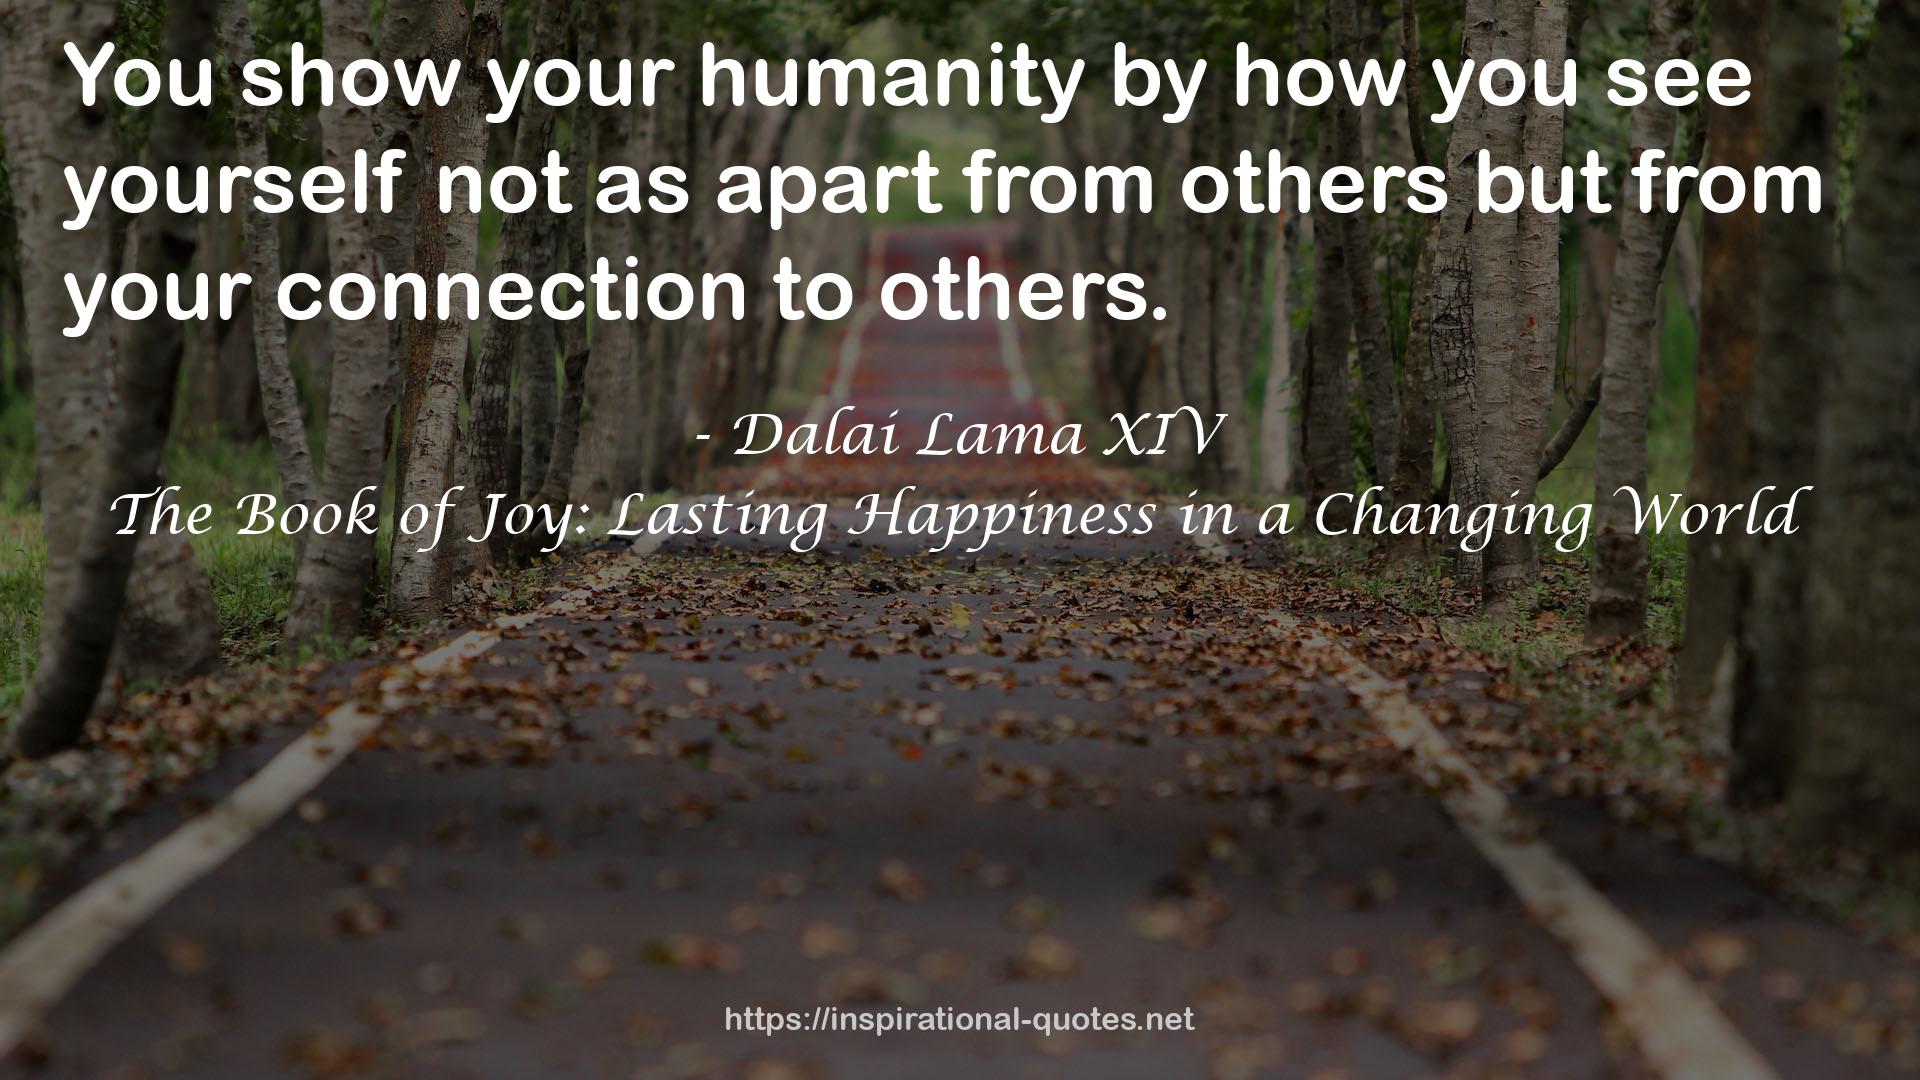 The Book of Joy: Lasting Happiness in a Changing World QUOTES